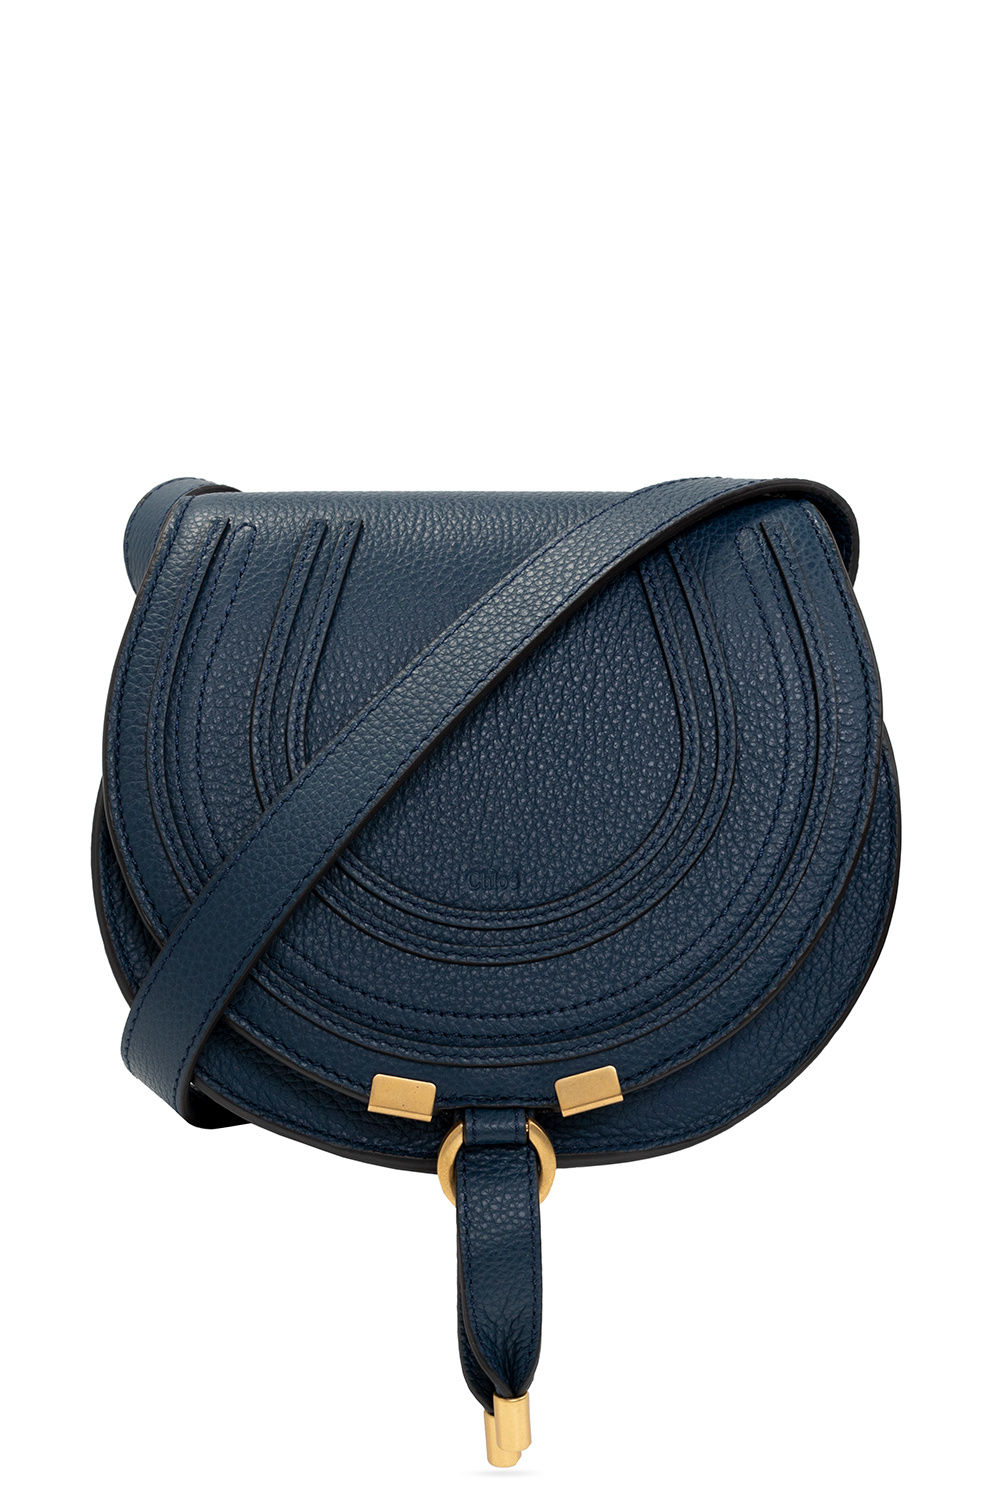 Chloé 'Marcie Small' shoulder bag | Women's Bags | GiftofvisionShops